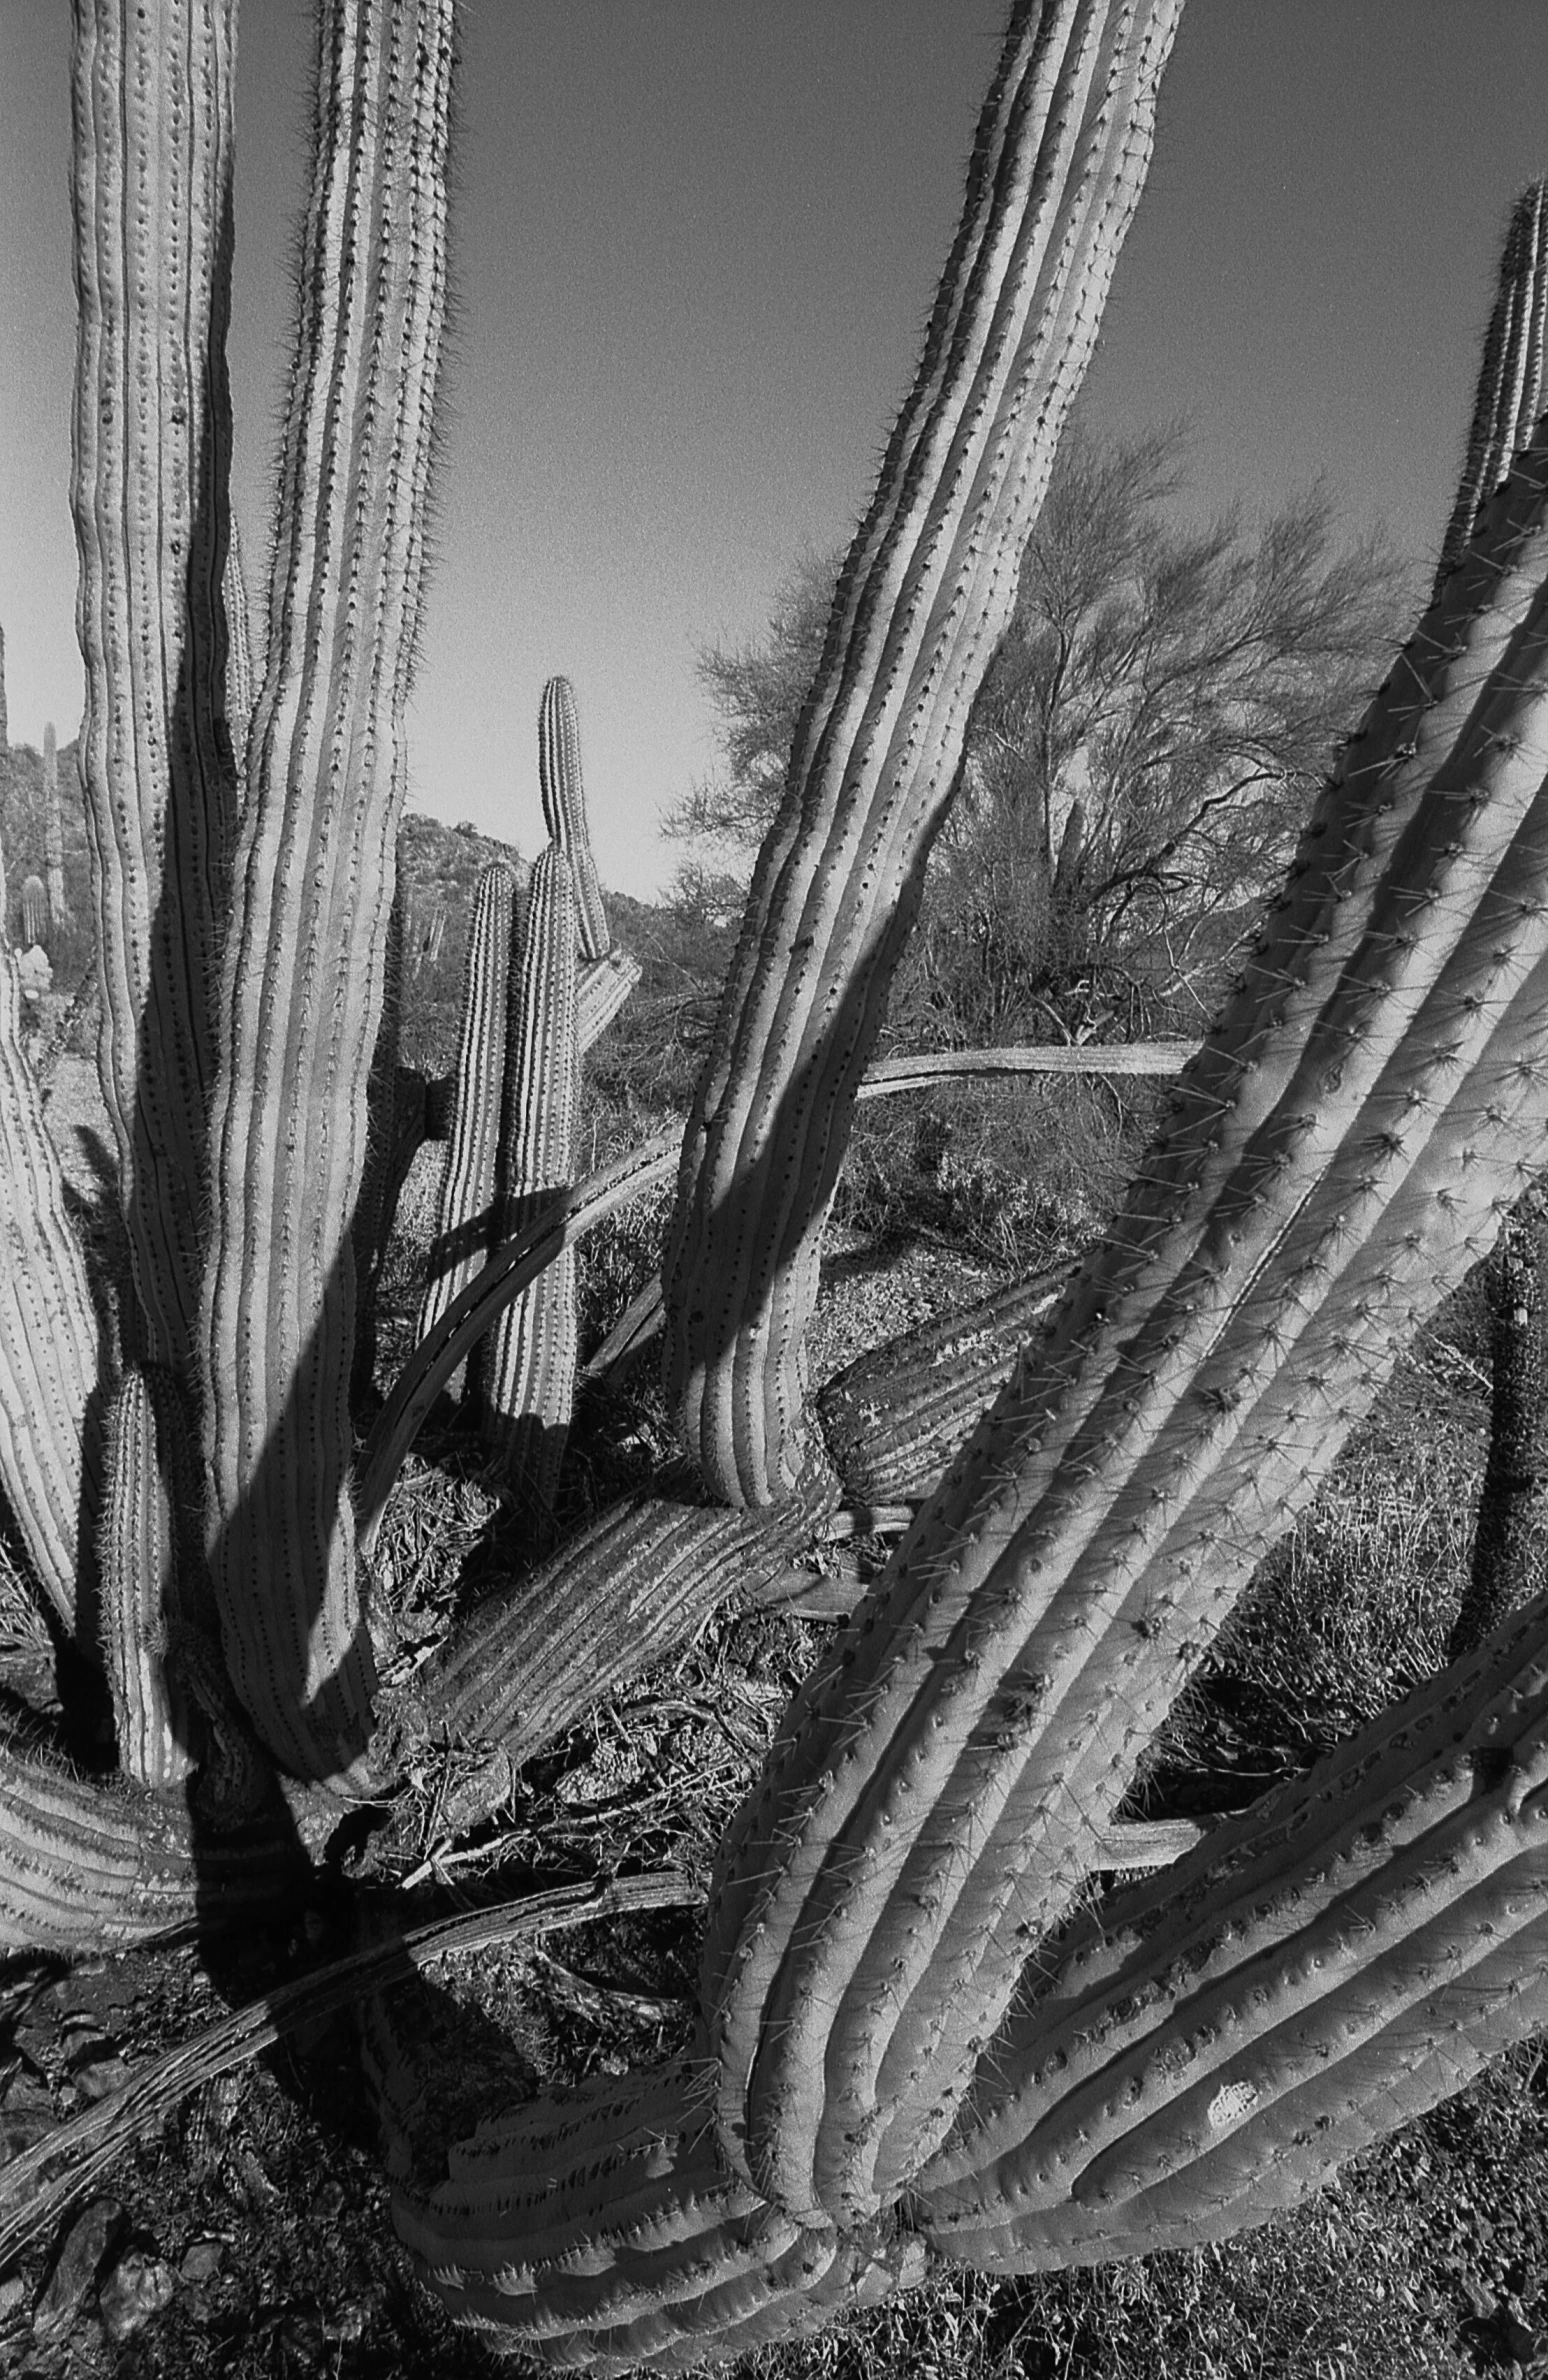 a black and white po of some cactus plants